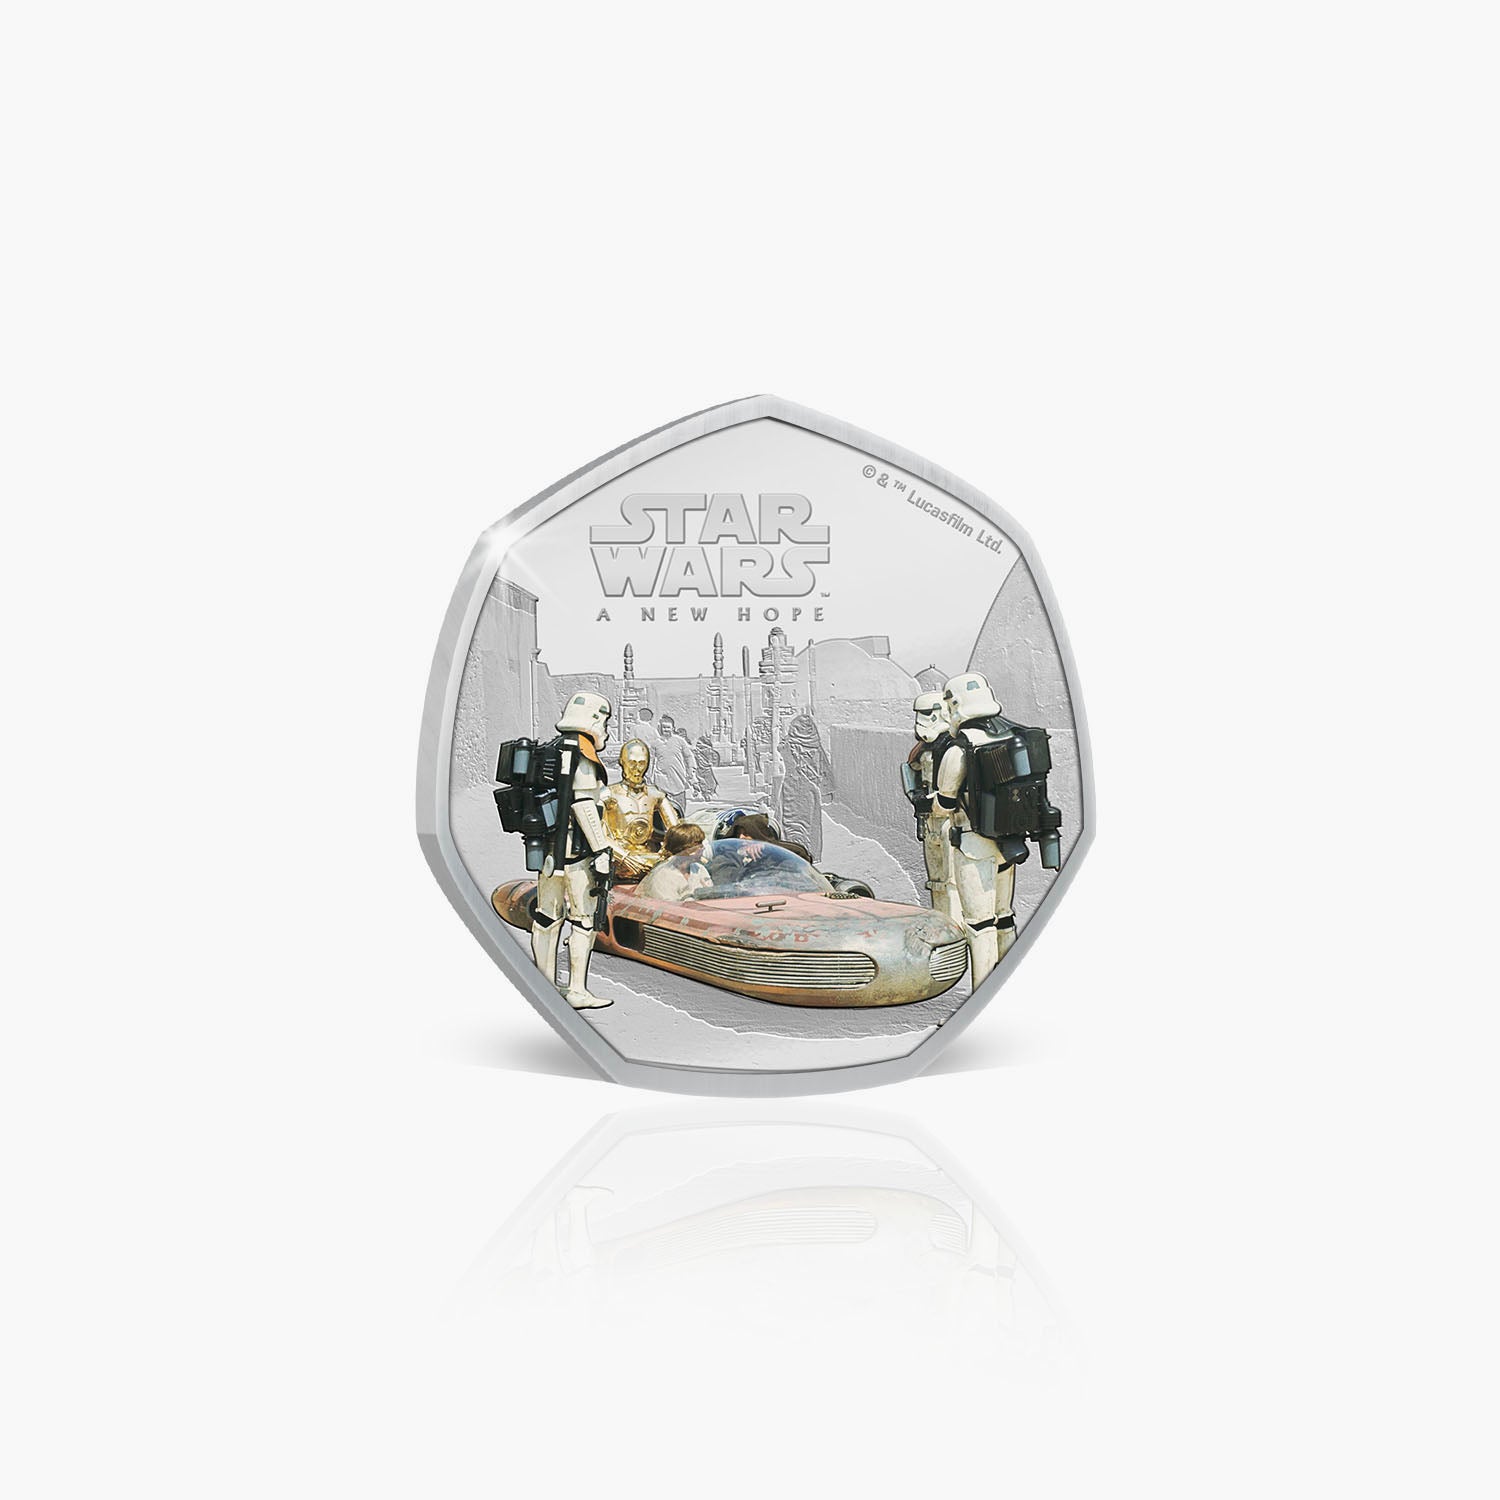 A New Hope - Jedi Mind Trick Silver Plated Coin